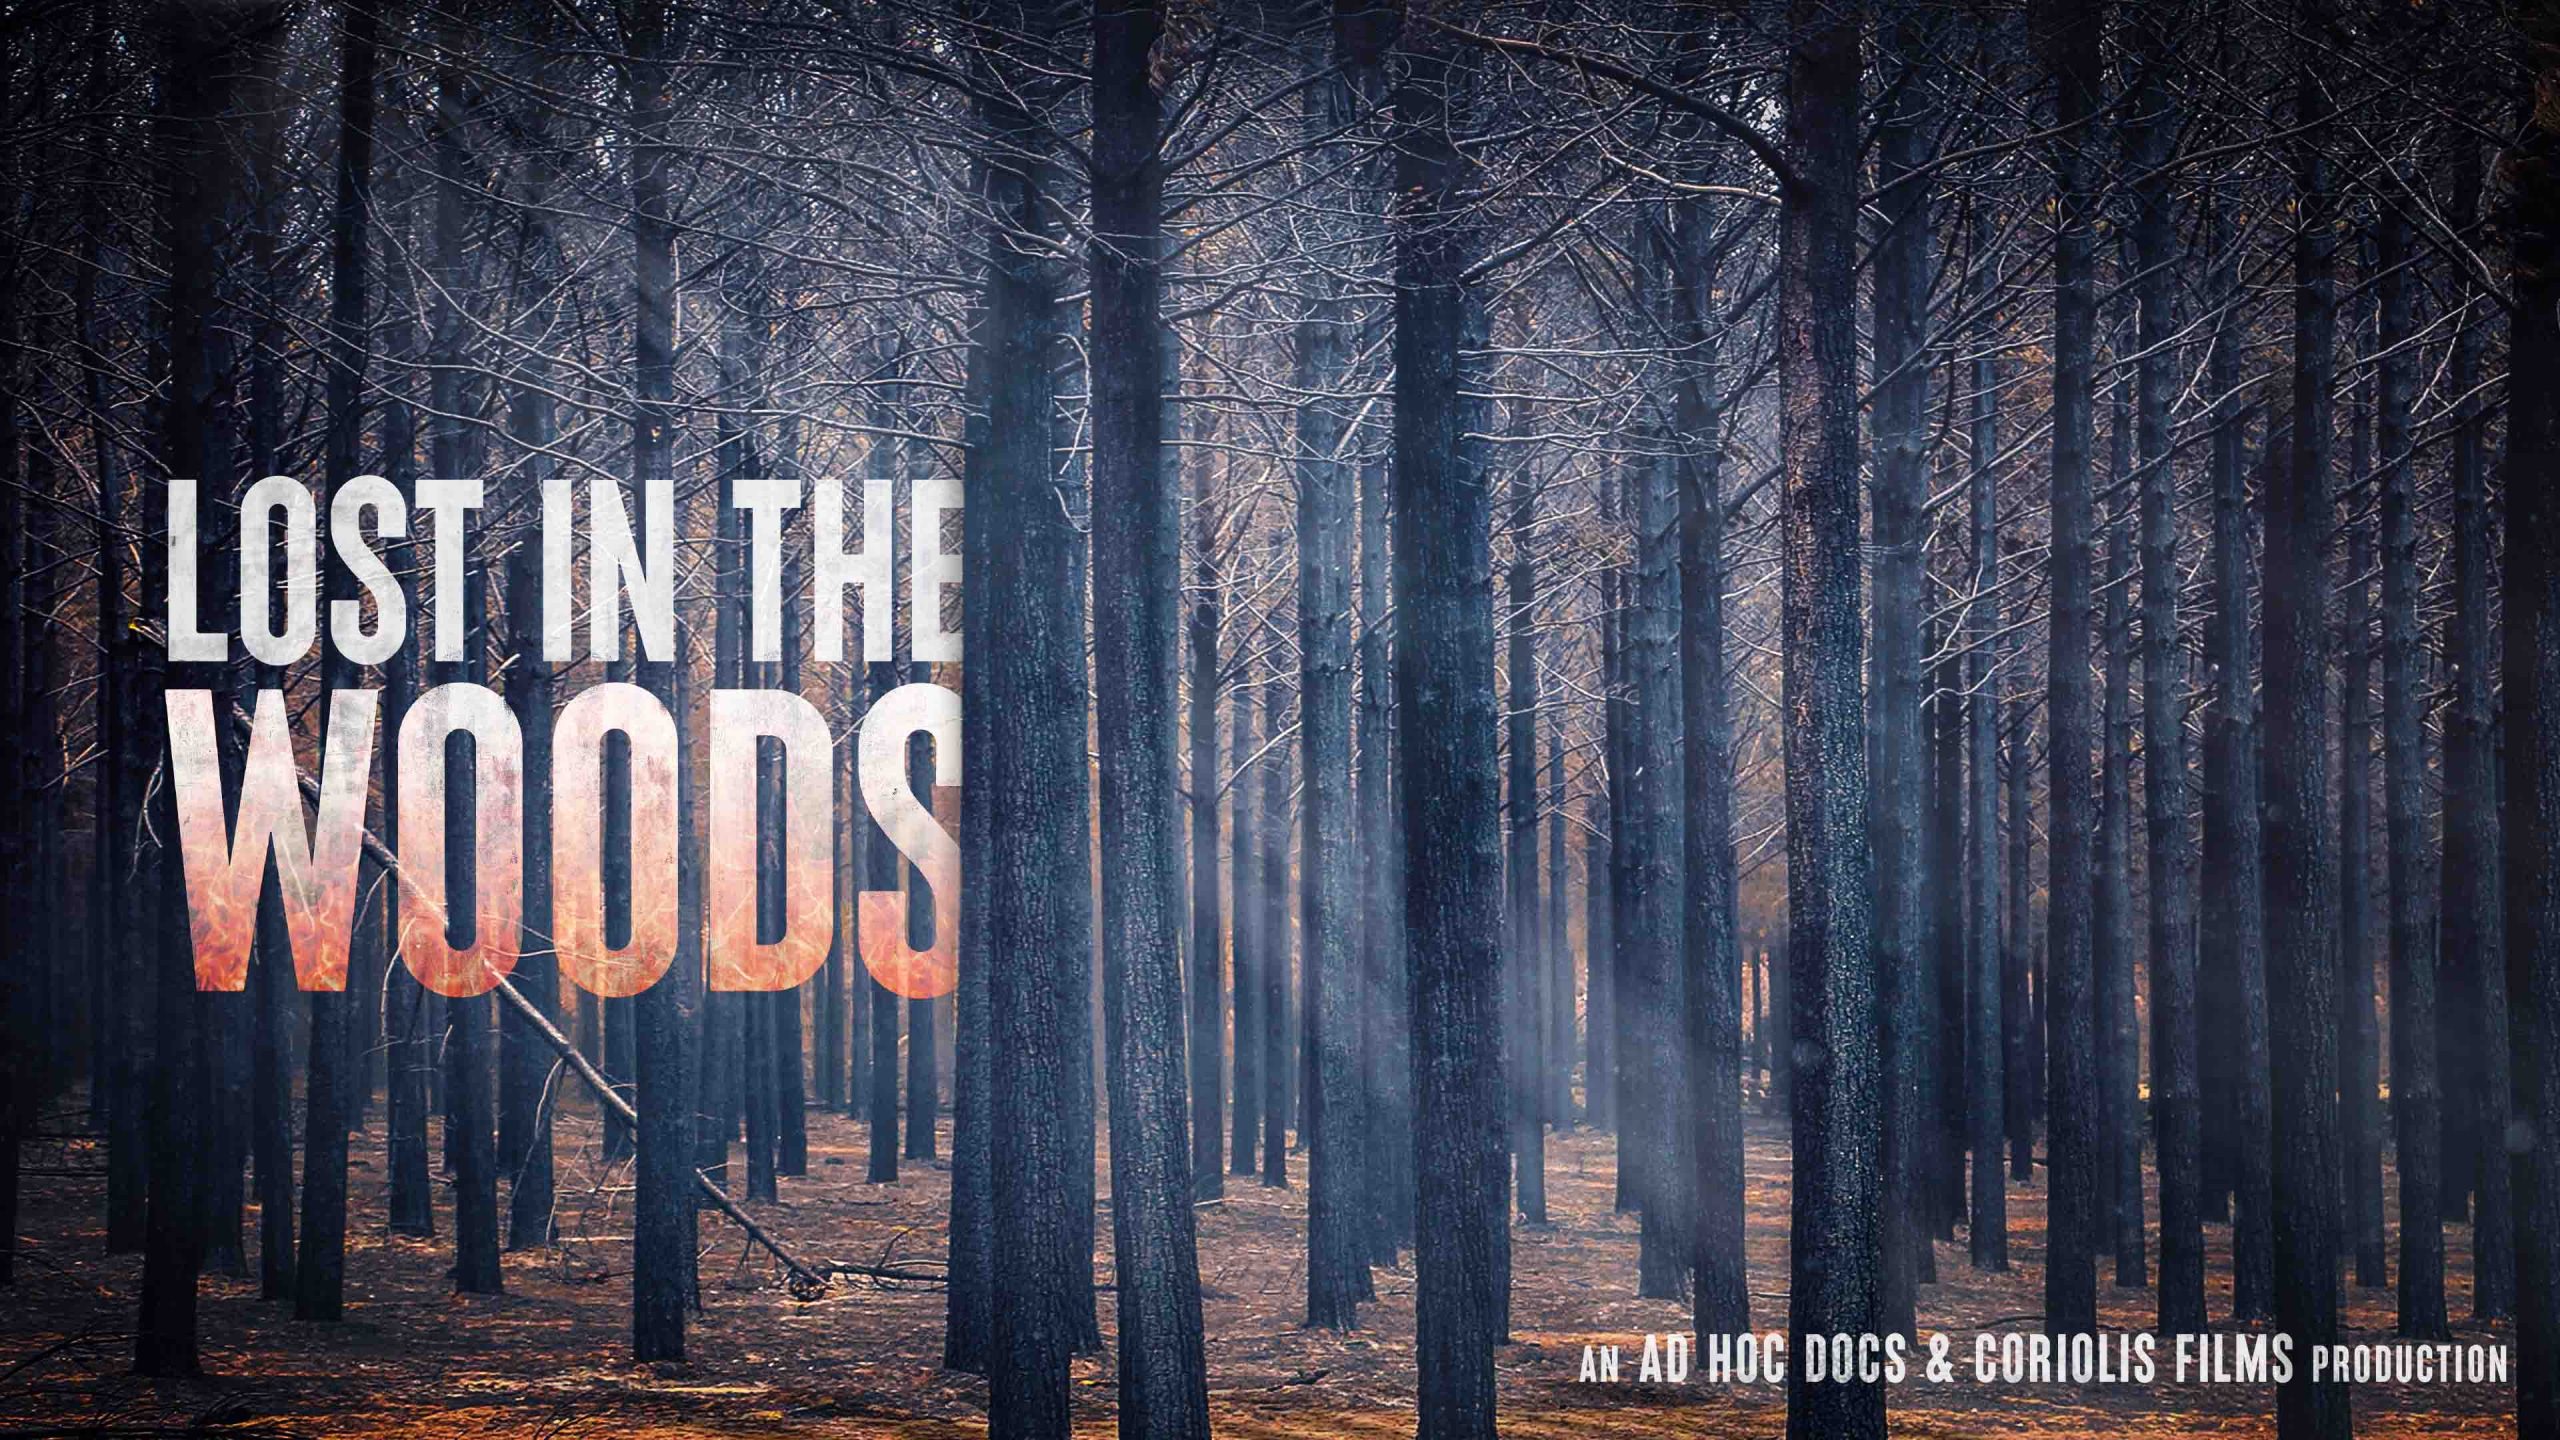 into the woods movie wallpaper